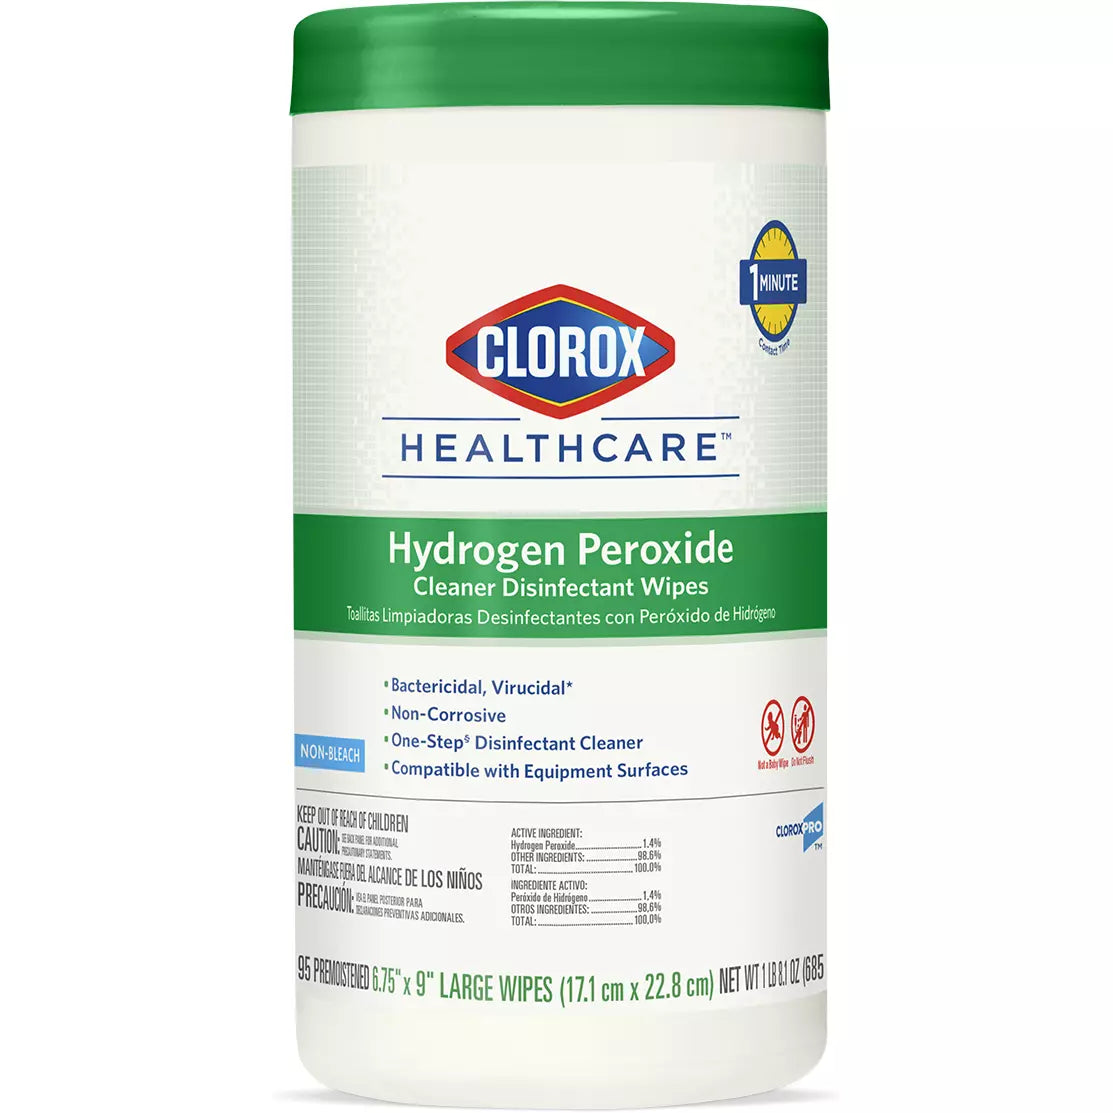 Clorox Healthcare Hydrogen Peroxide Cleaner Disinfectant HCH 30824